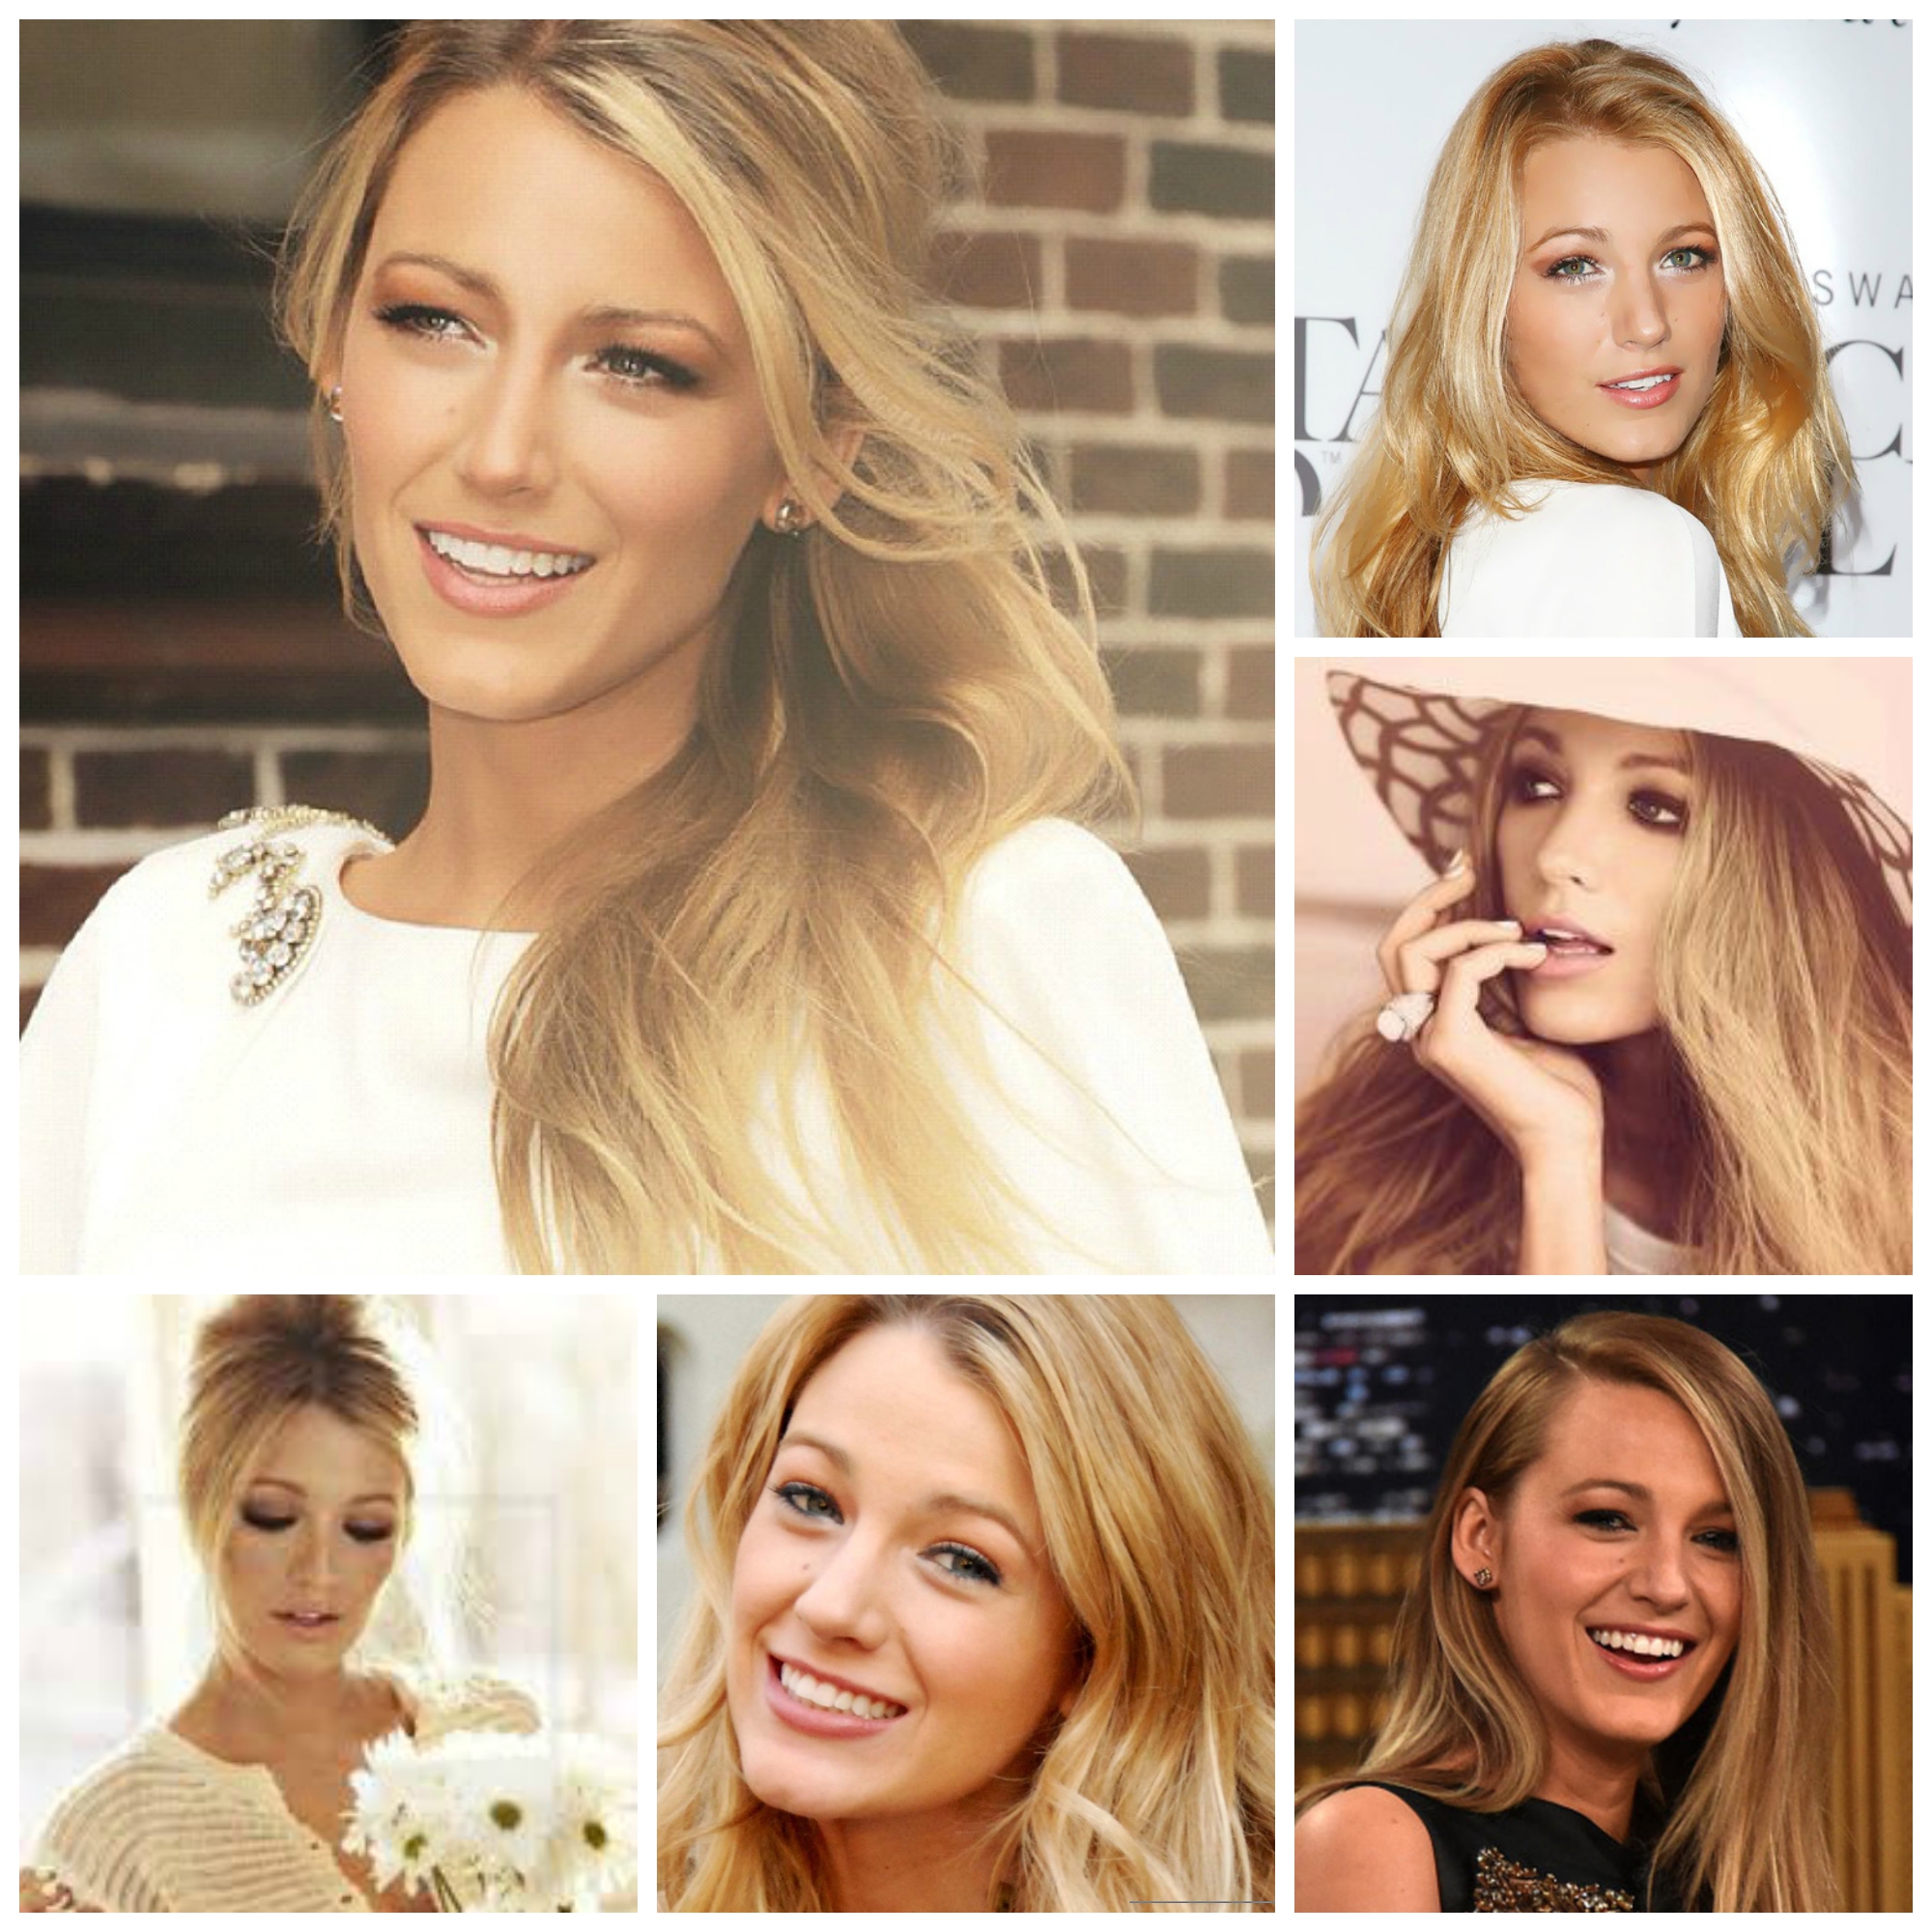 Blake Lively Collage